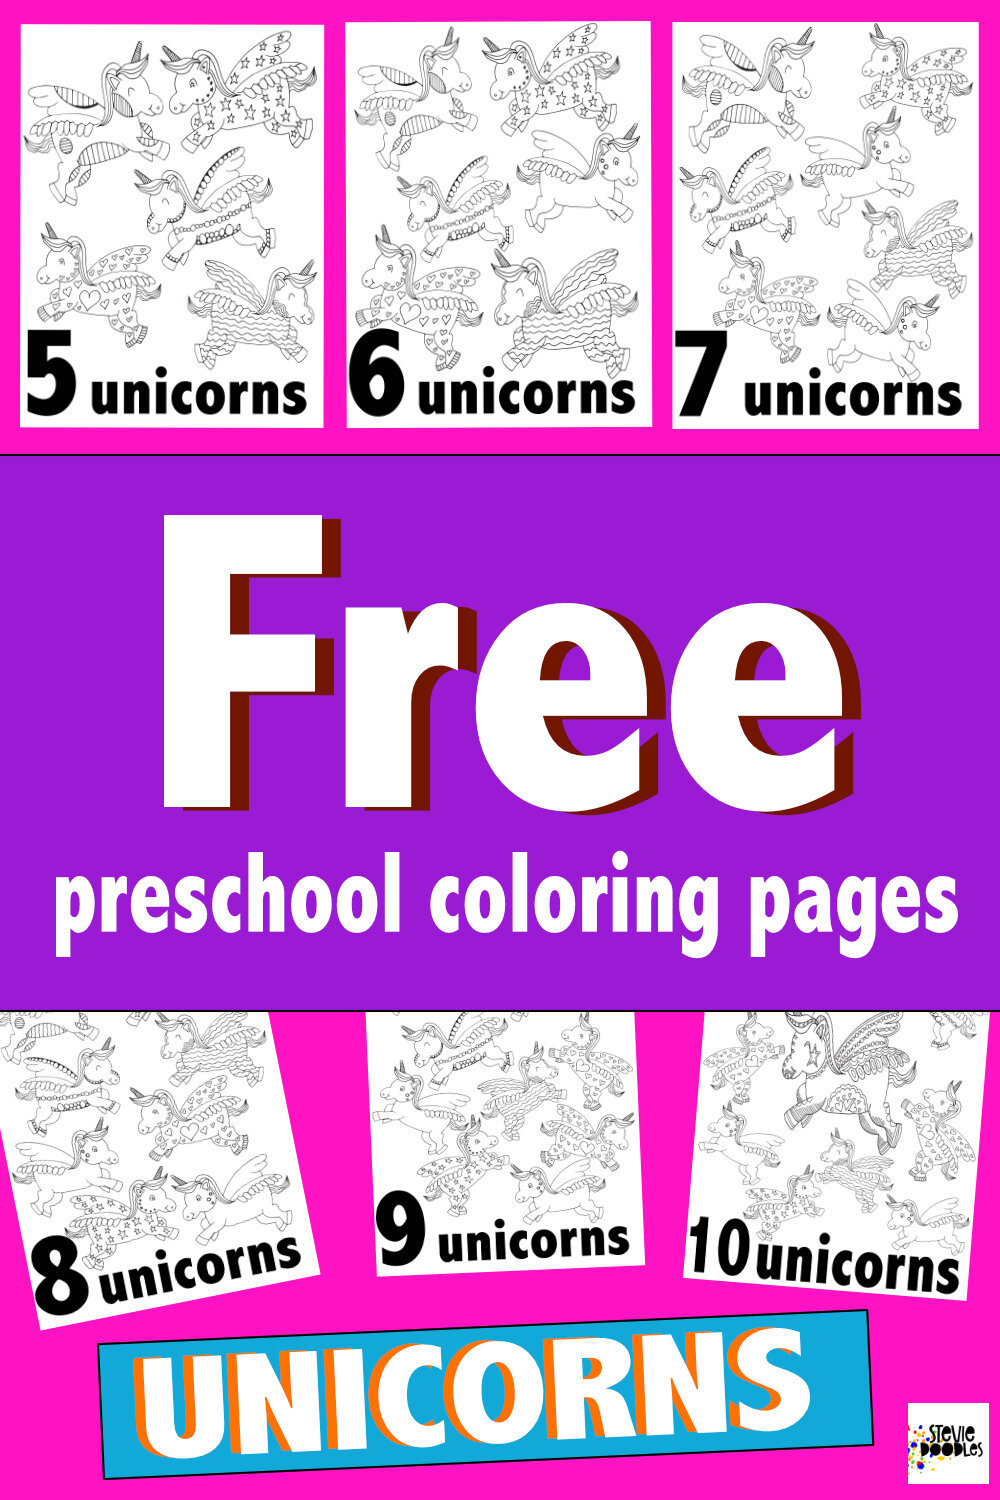 10 free printable Unicorn coloring pages! Print and color all 10 kids coloring pages